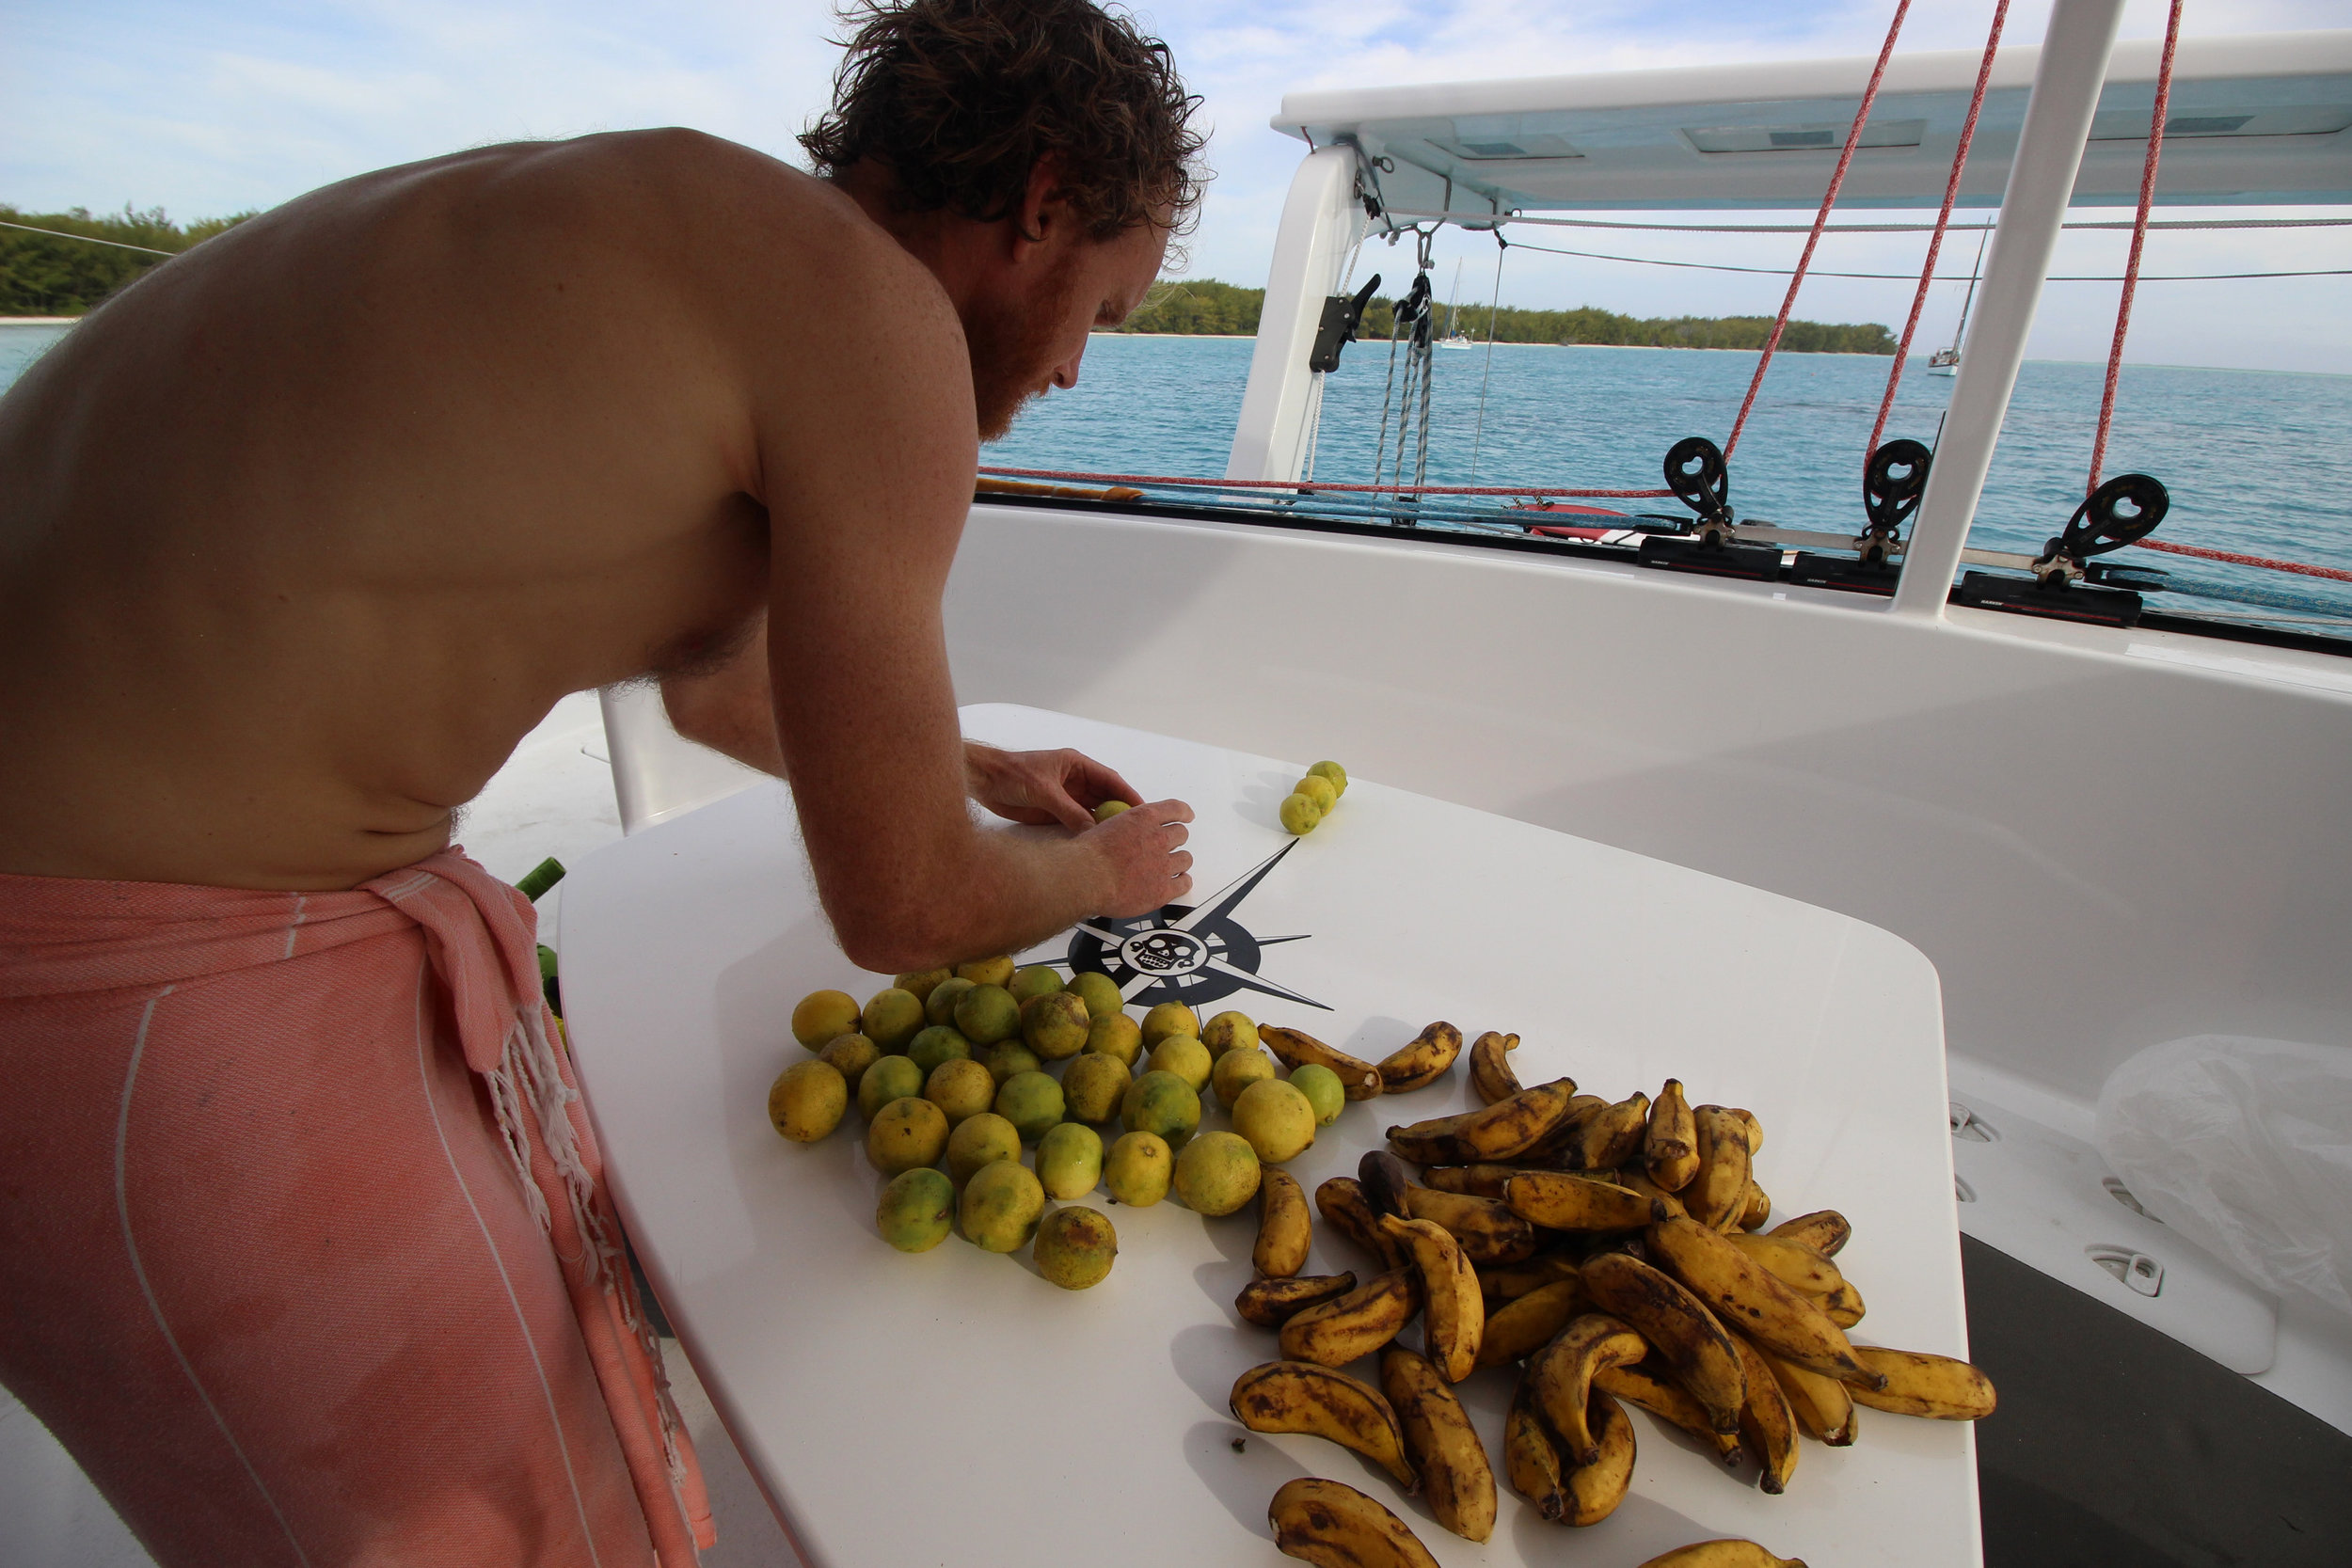  The local family living on Motu Piscine gave us some fresh limes and Bananas after we went to introduce ourselves and ask if it was ok for us to collect some coconuts  